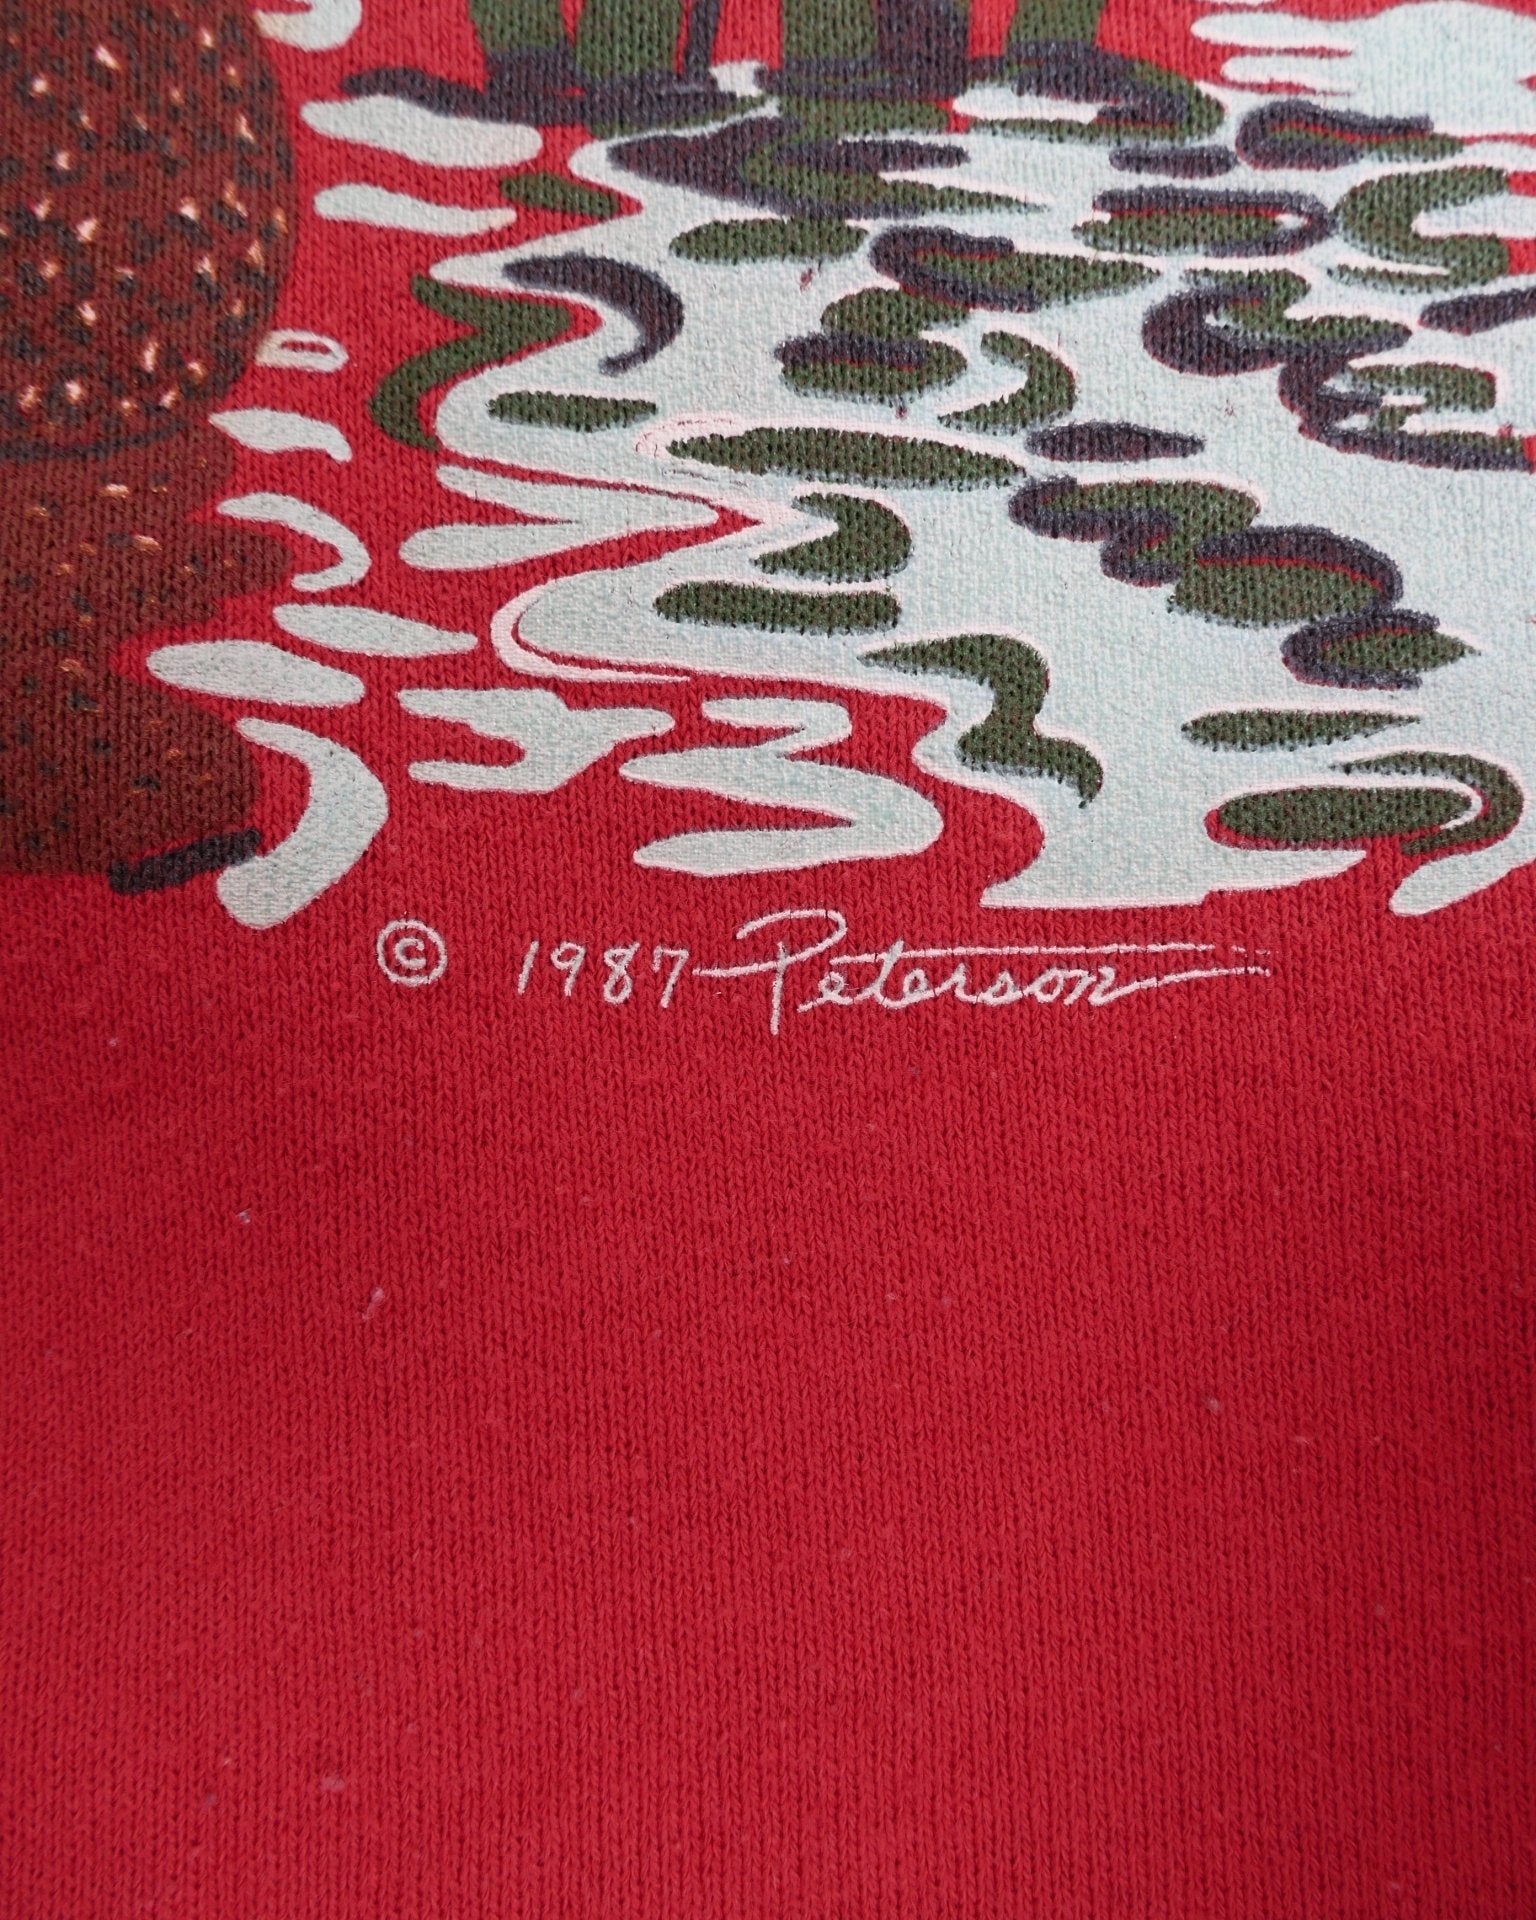 Duck 1989 printed Graphic Sweater - Peeces